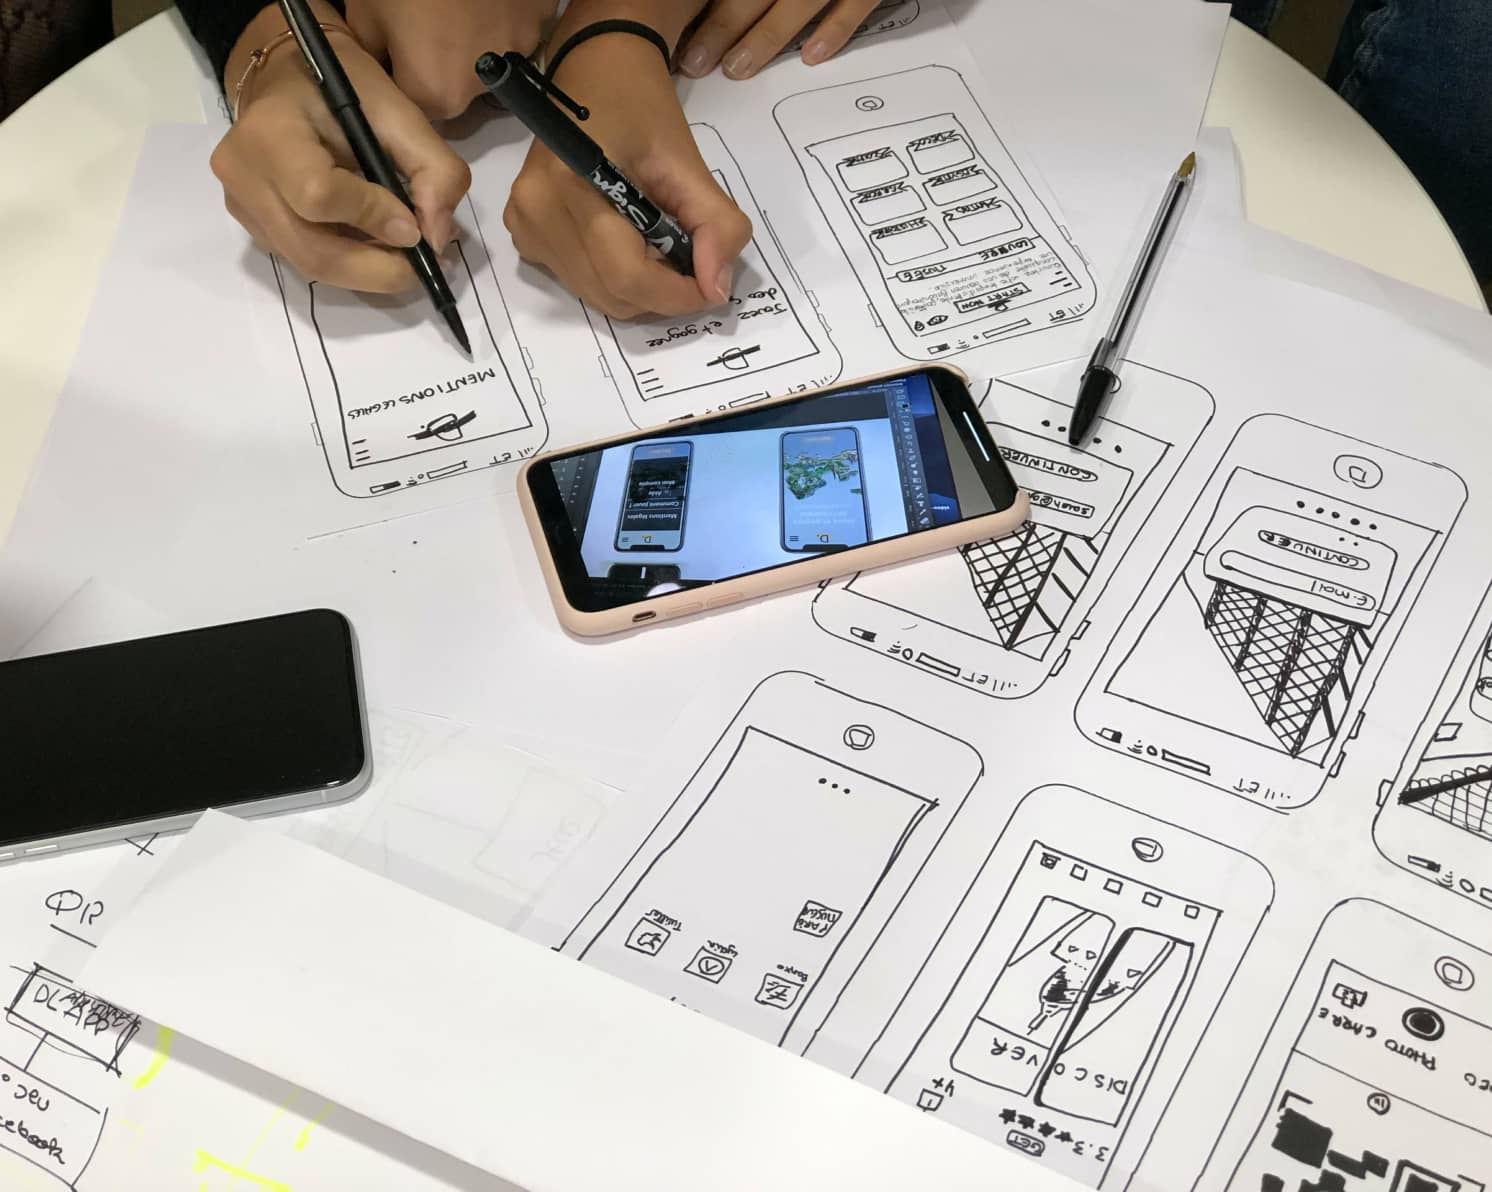 A person working on drawing wireframes on paper